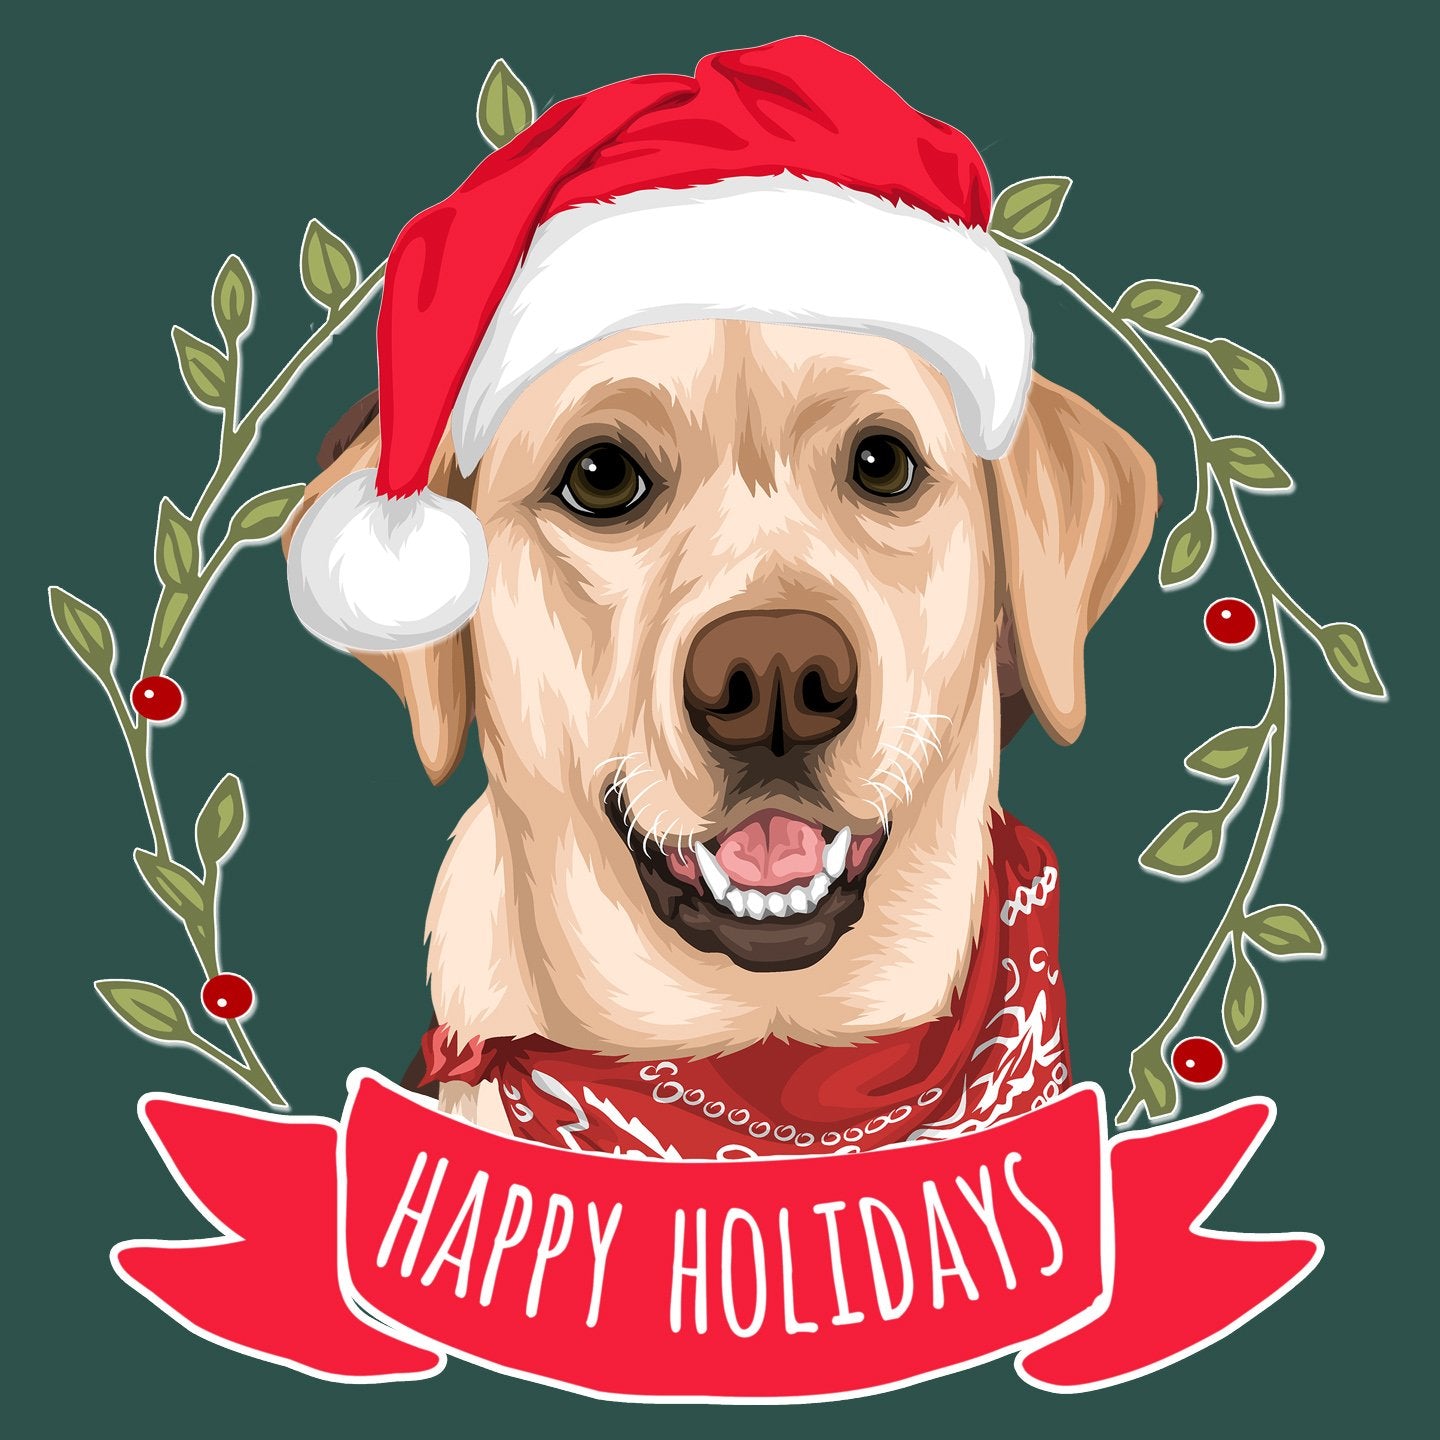 Happy Holidays Yellow Lab - Women's Fitted T-Shirt